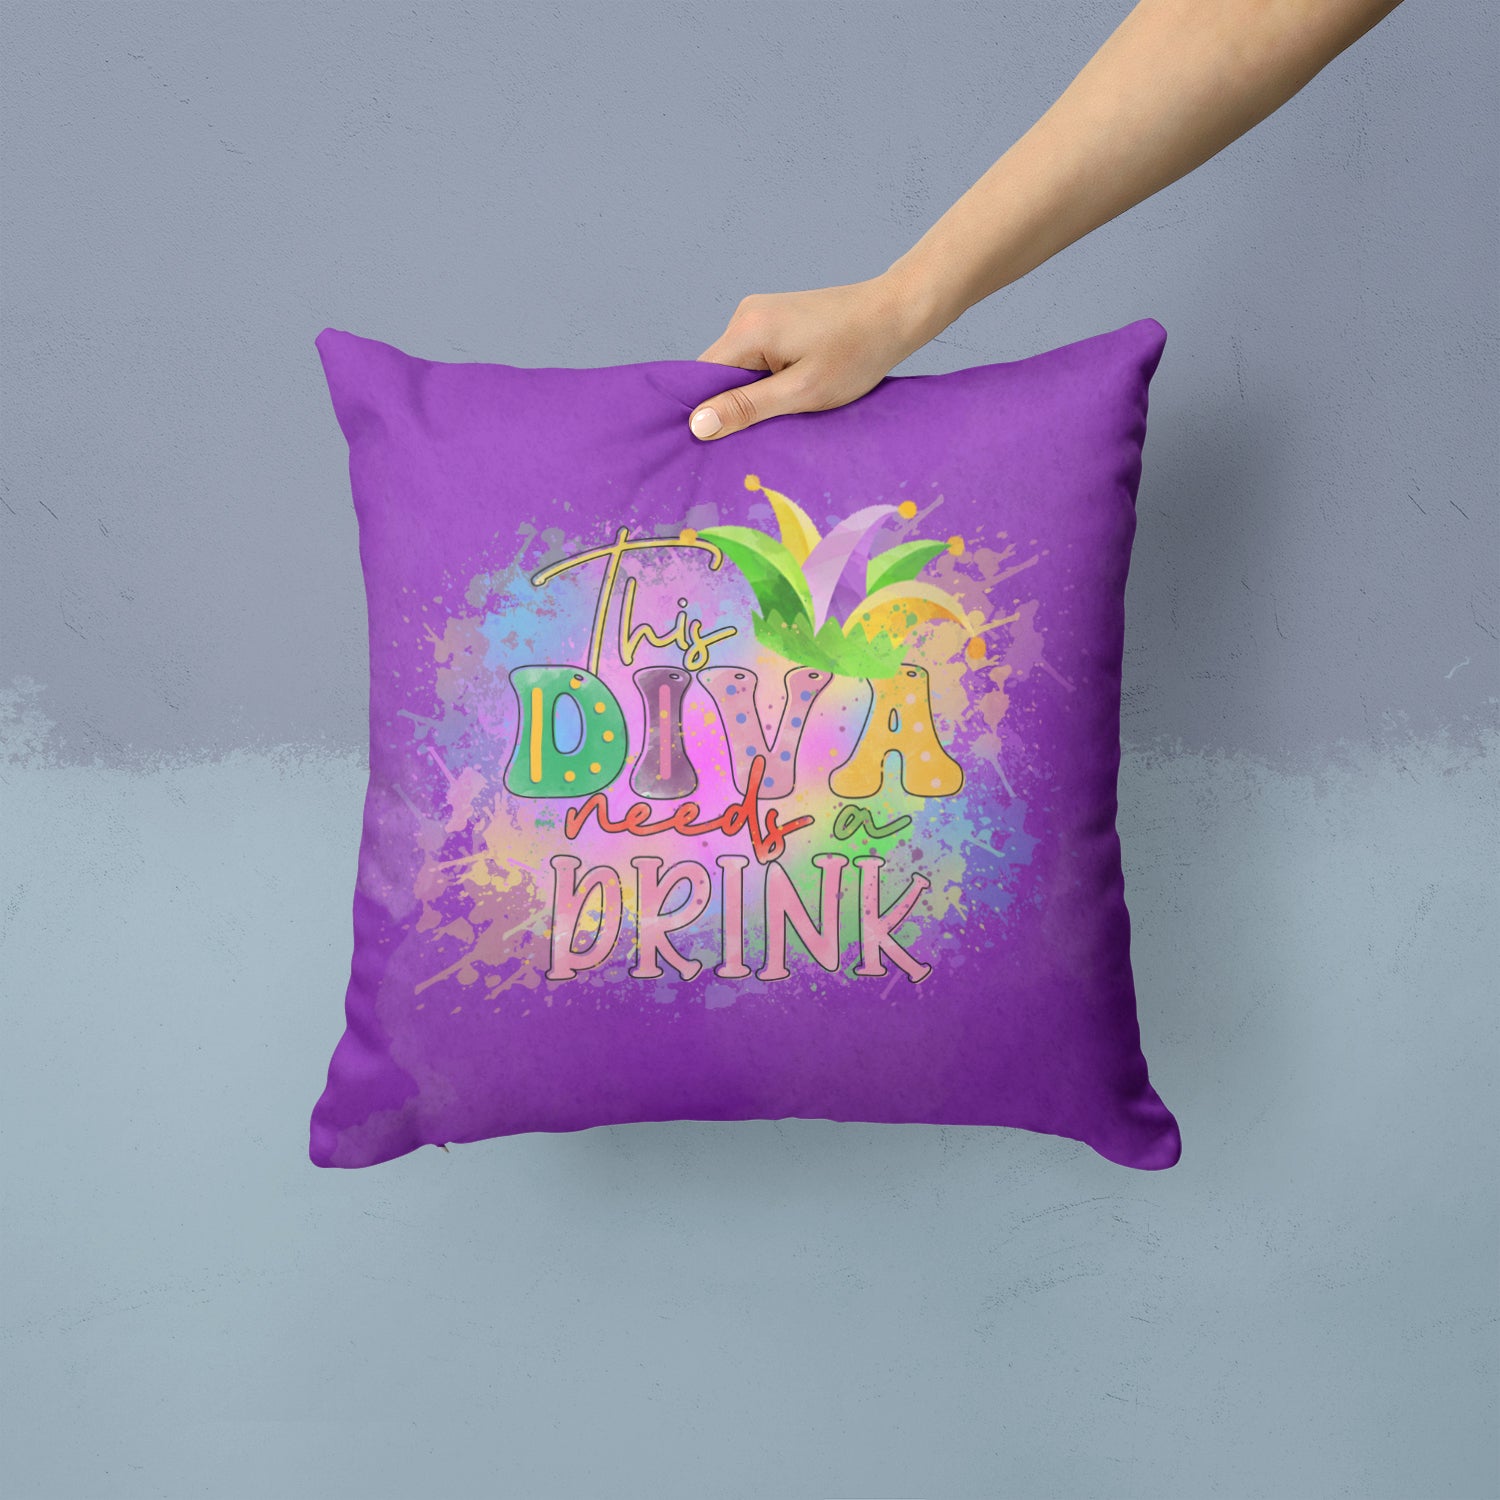 Buy this This Diva needs a Drink Mardi Gras Fabric Decorative Pillow